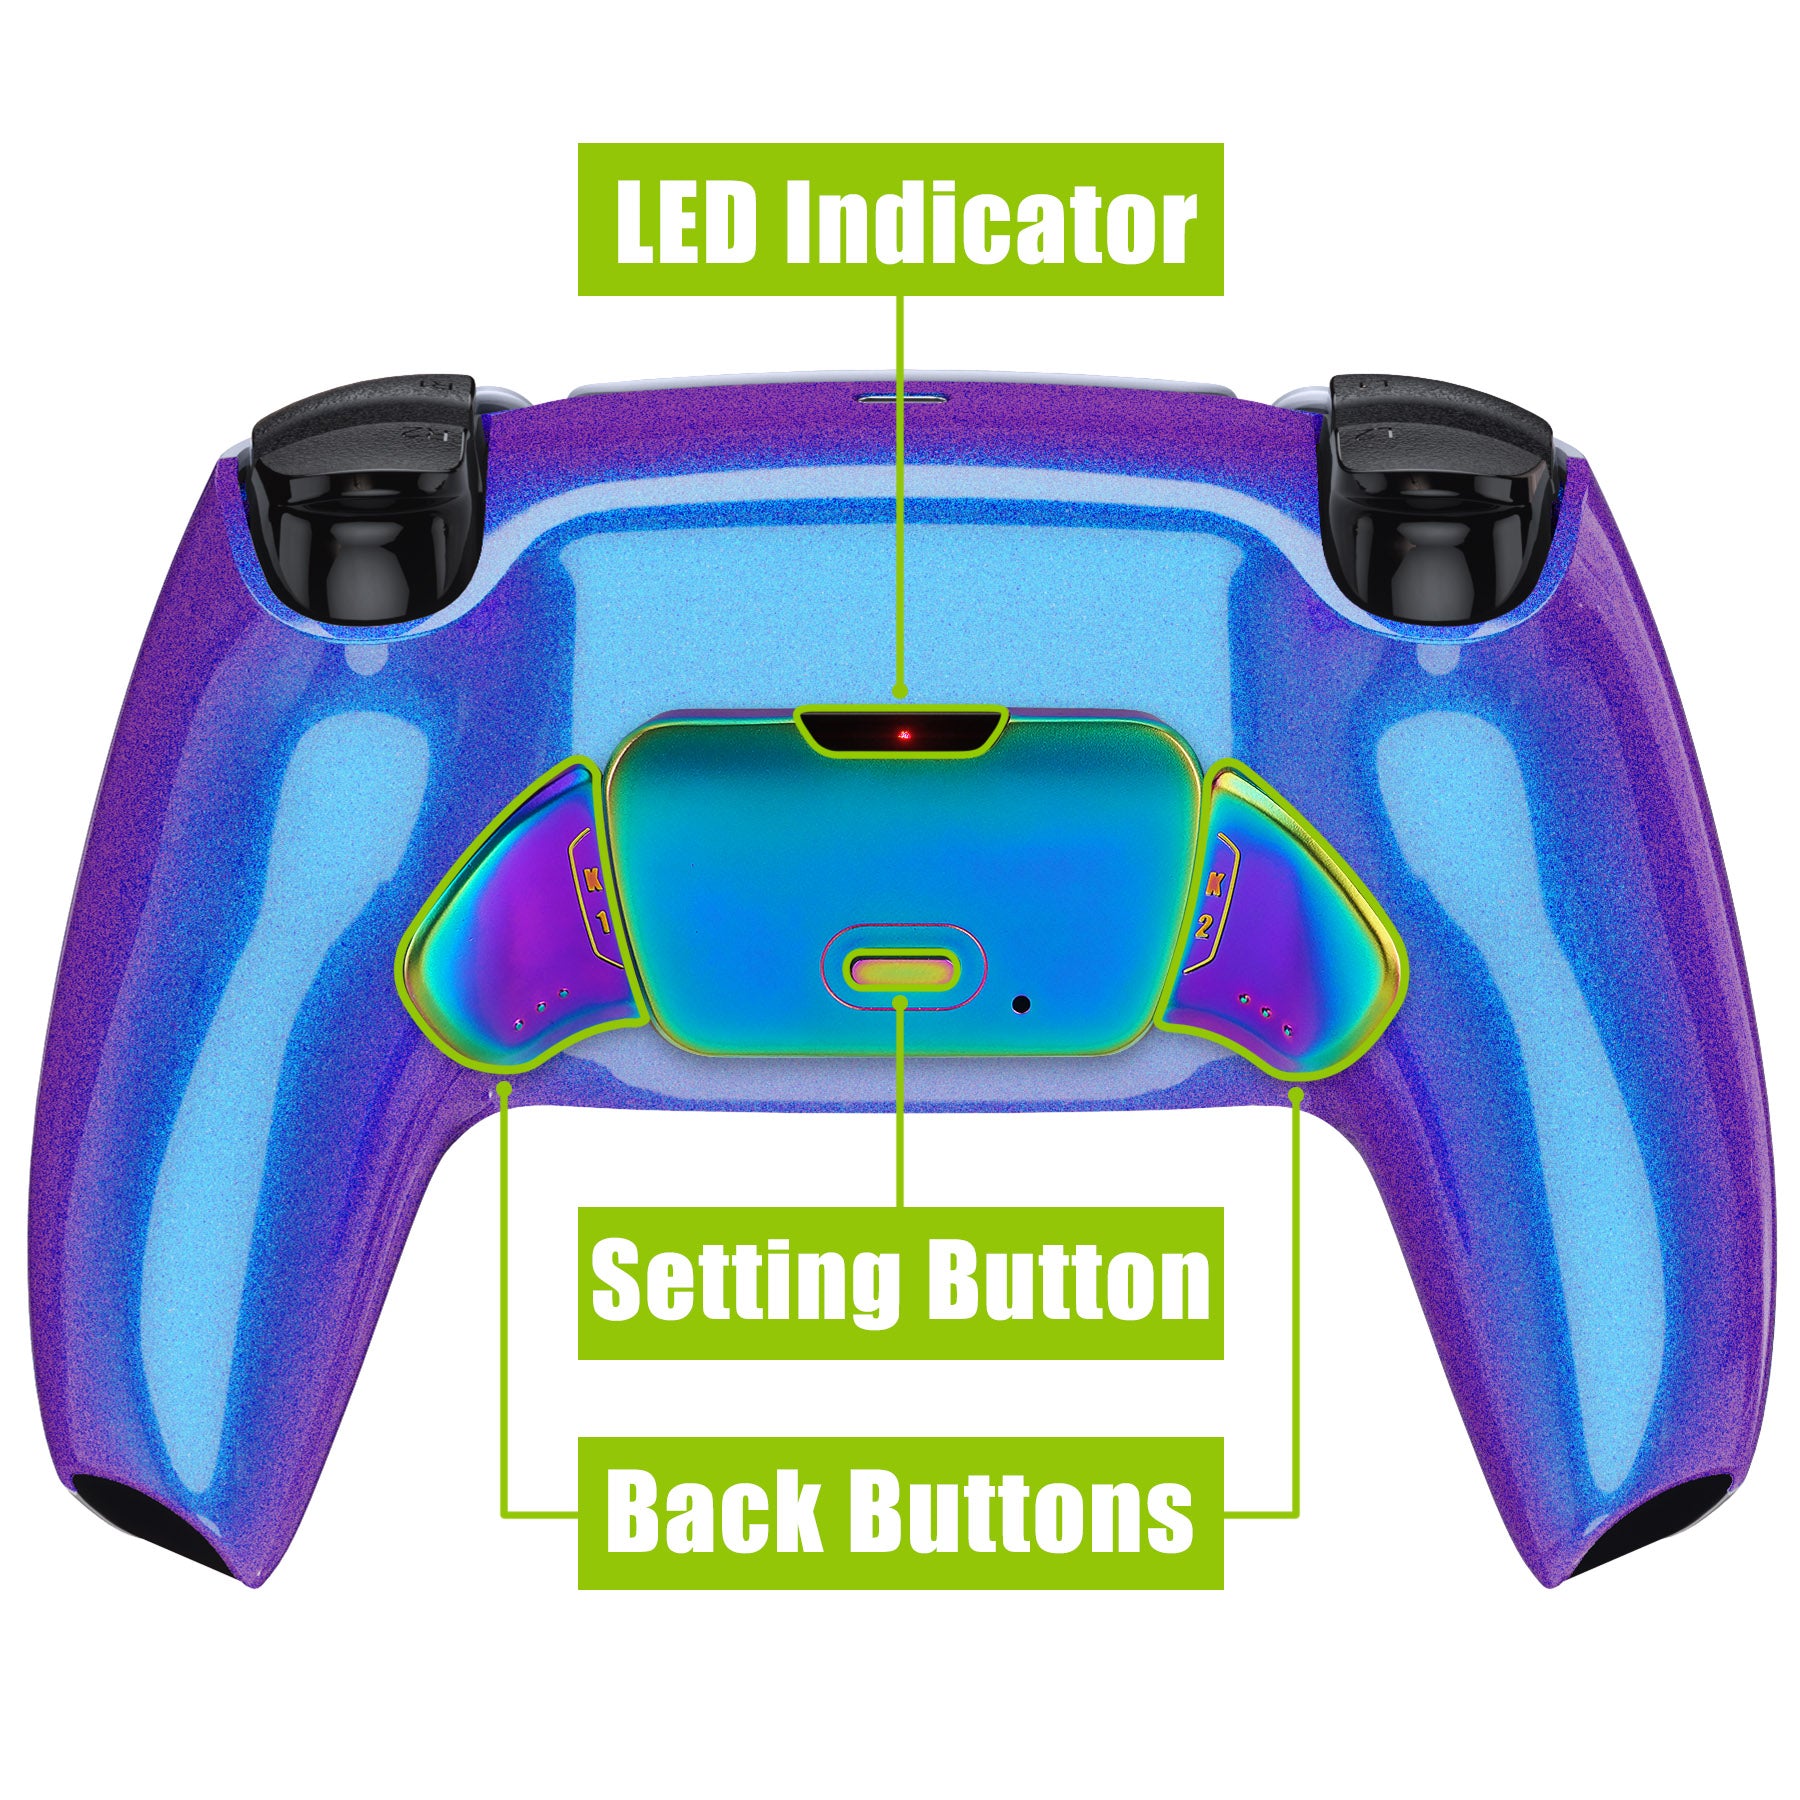 eXtremeRate Real Metal Buttons (RMB) Version RISE 2.0 Remap Kit for PS5 Controller BDM-010/020 - Chameleon Purple Blue - Rainbow Aura Blue & Purple eXtremeRate